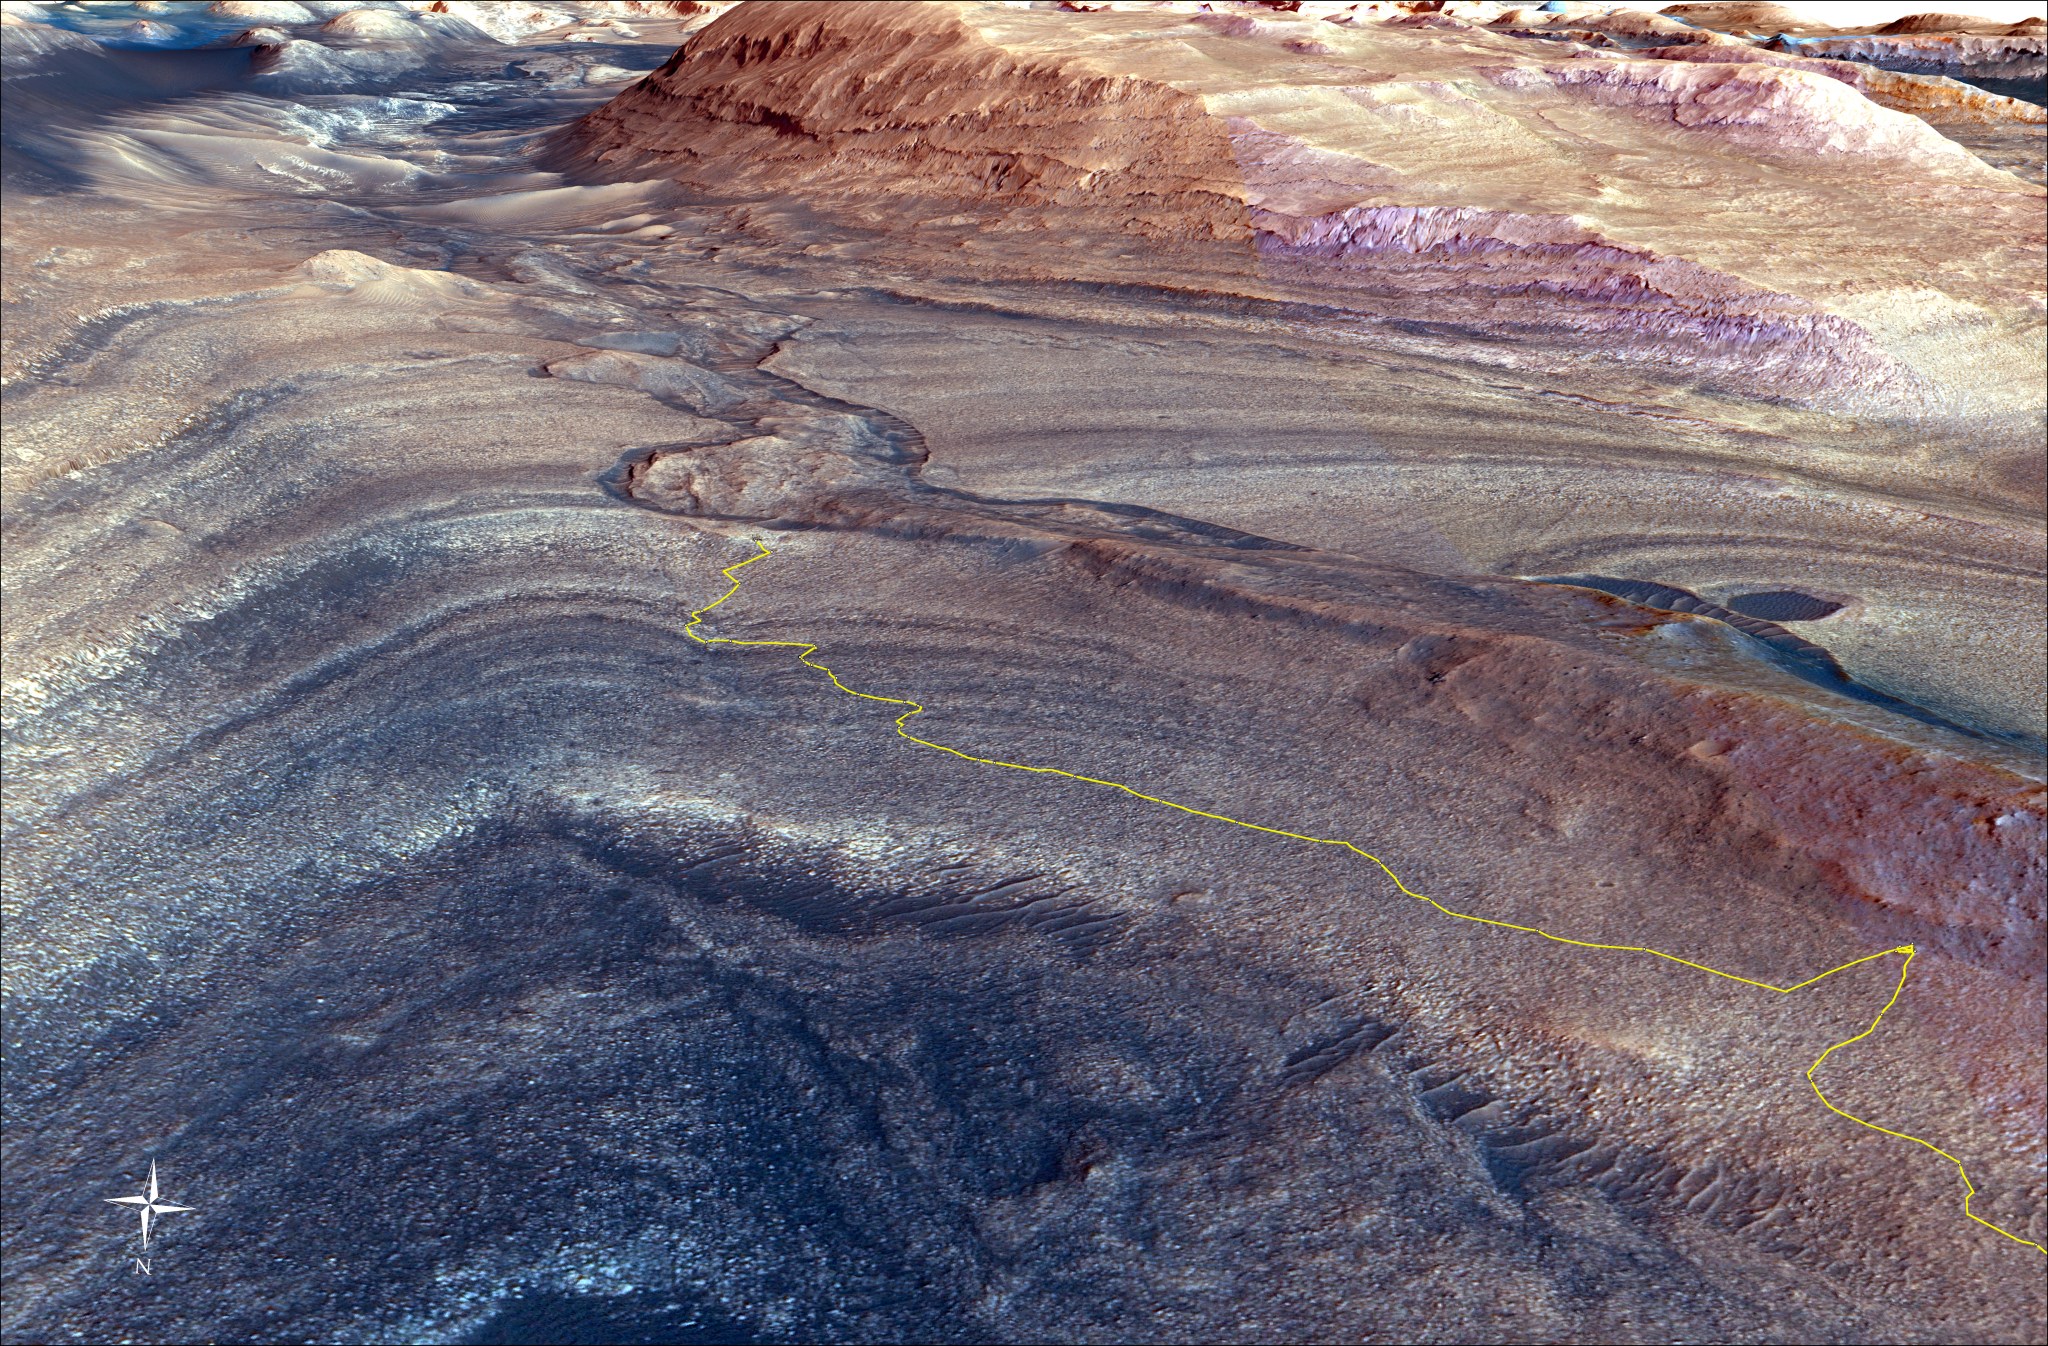 This rendering shows the area where NASA’s Curiosity Mars rover climbed a steep slope to reach a location called Gediz Vallis channel